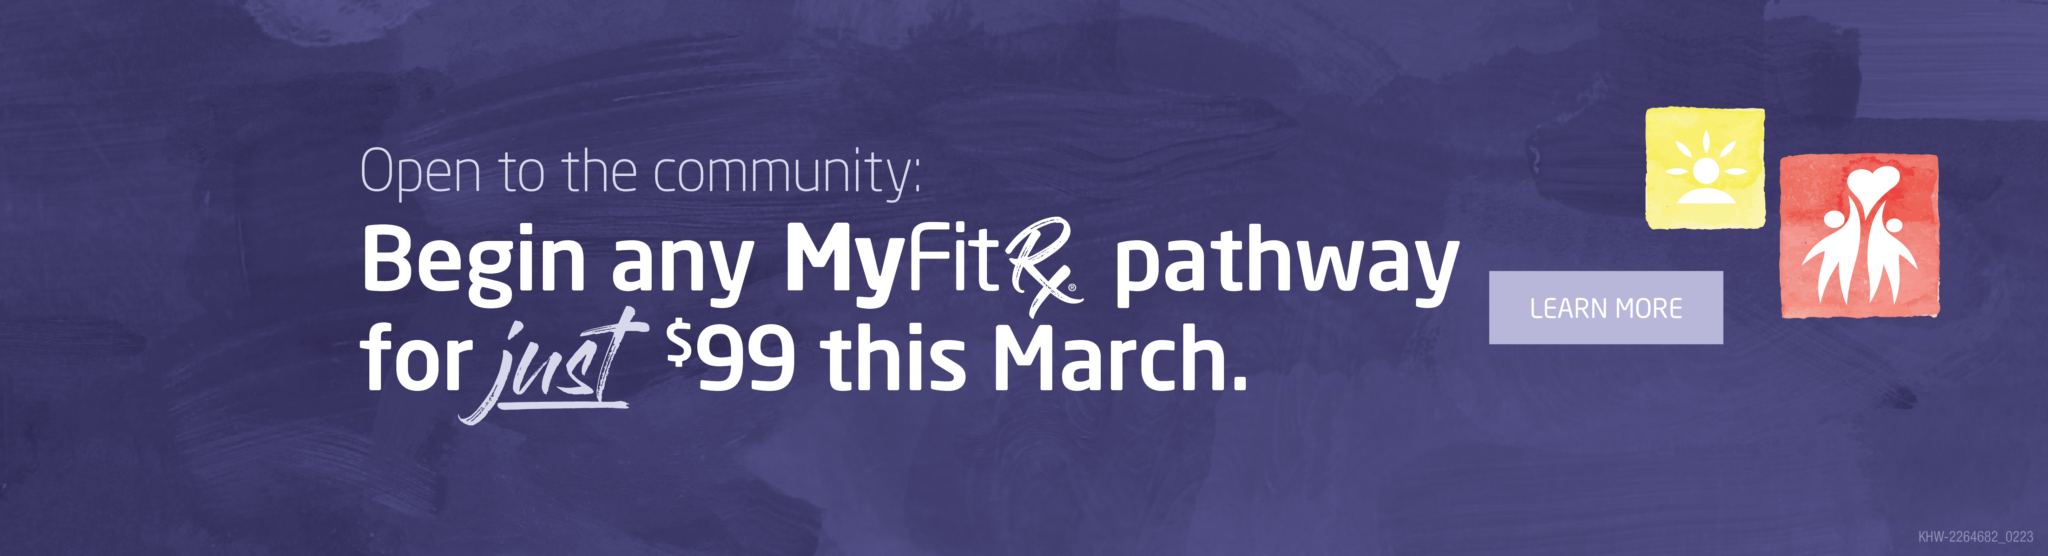 Begin any pathway for just $99 this March.